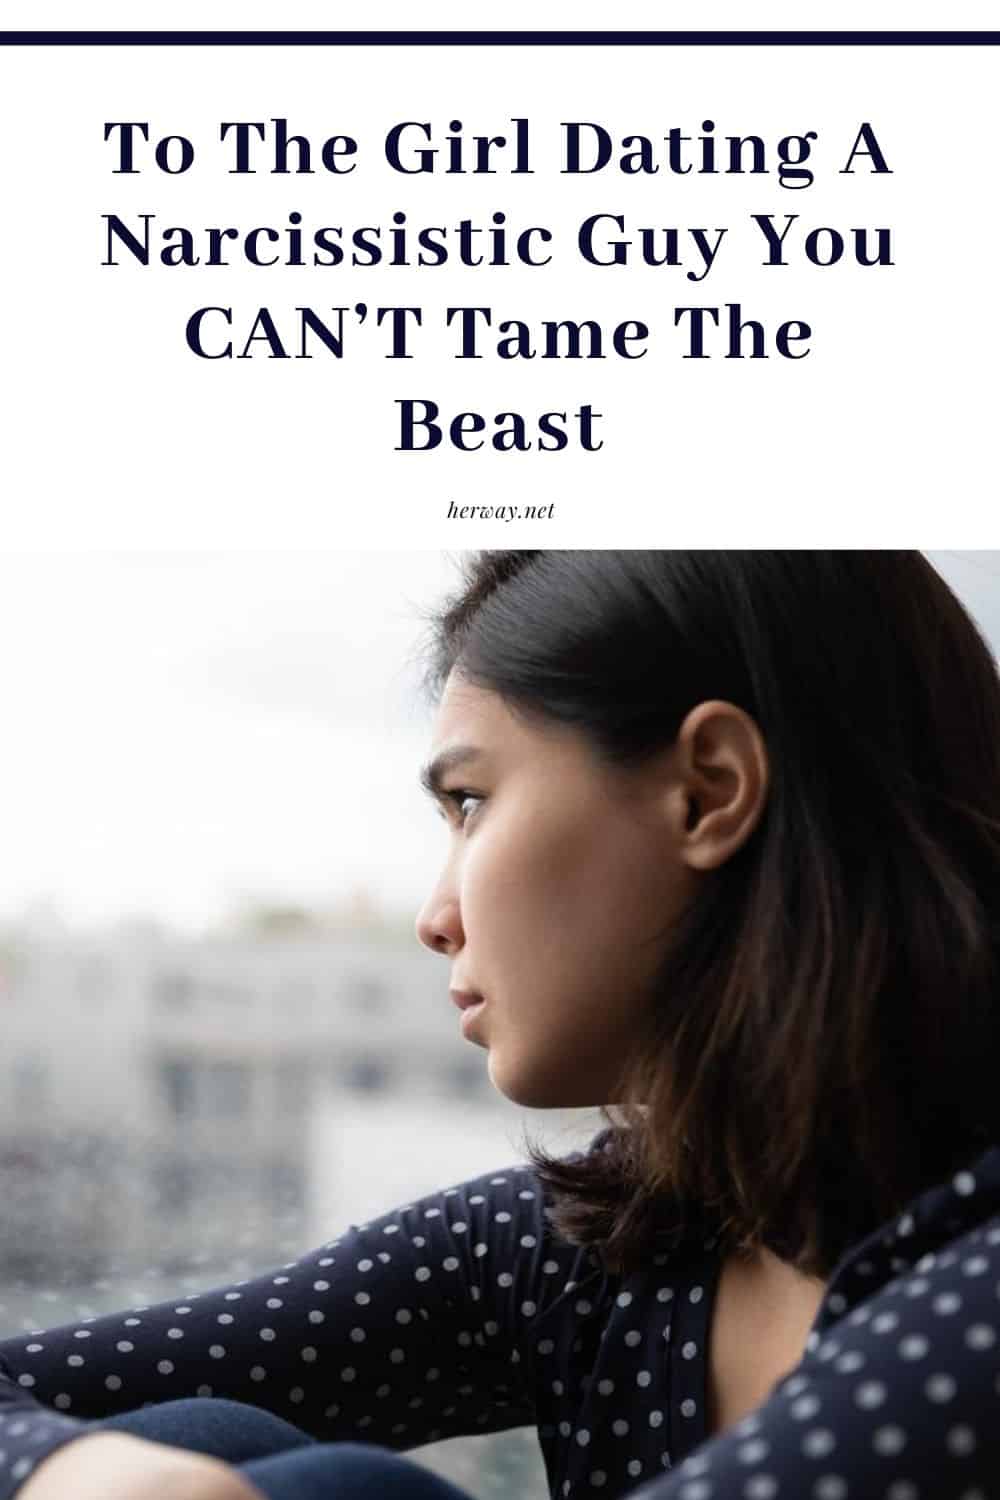 To The Girl Dating A Narcissistic Guy You CAN’T Tame The Beast